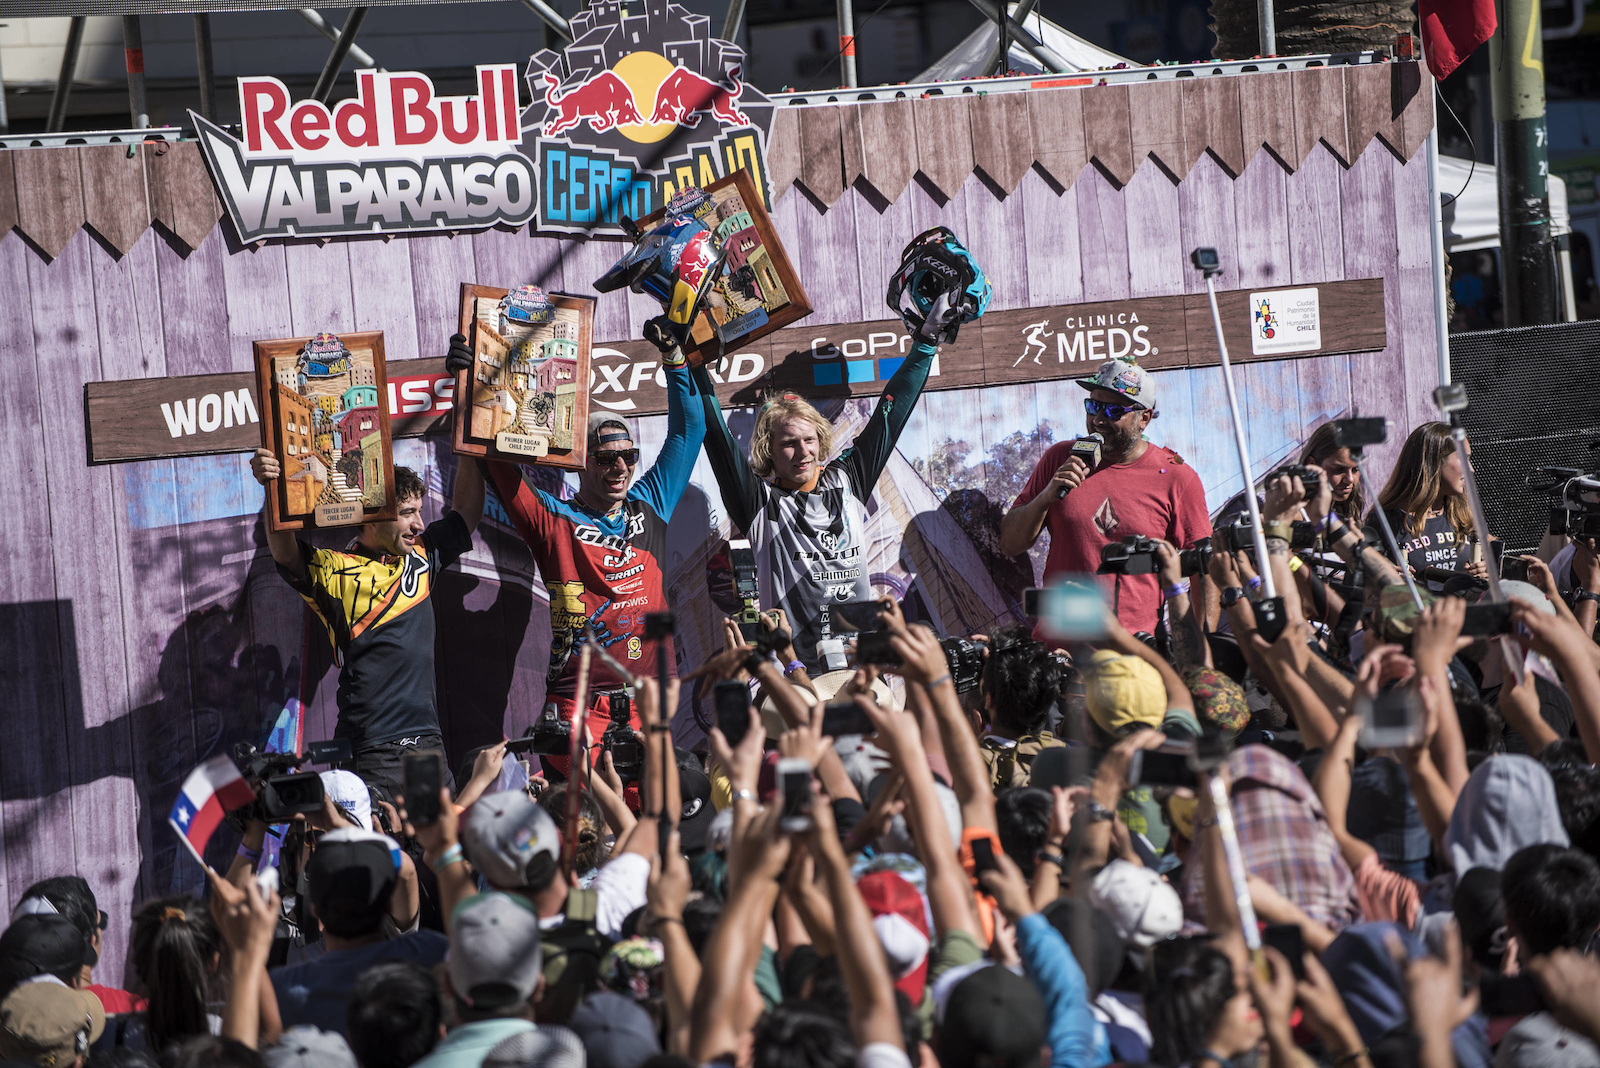 Pedro Ferreira, Thomas Slavik and Bernard Kerr celebrates during Red Bull Valparaiso Cerro Abajo in Valparaiso, Chile on February 19, 2017 // Nicolas Gantz / Red Bull Content Pool // P-20170220-00243 // Usage for editorial use only // Please go to www.redbullcontentpool.com for further information. //